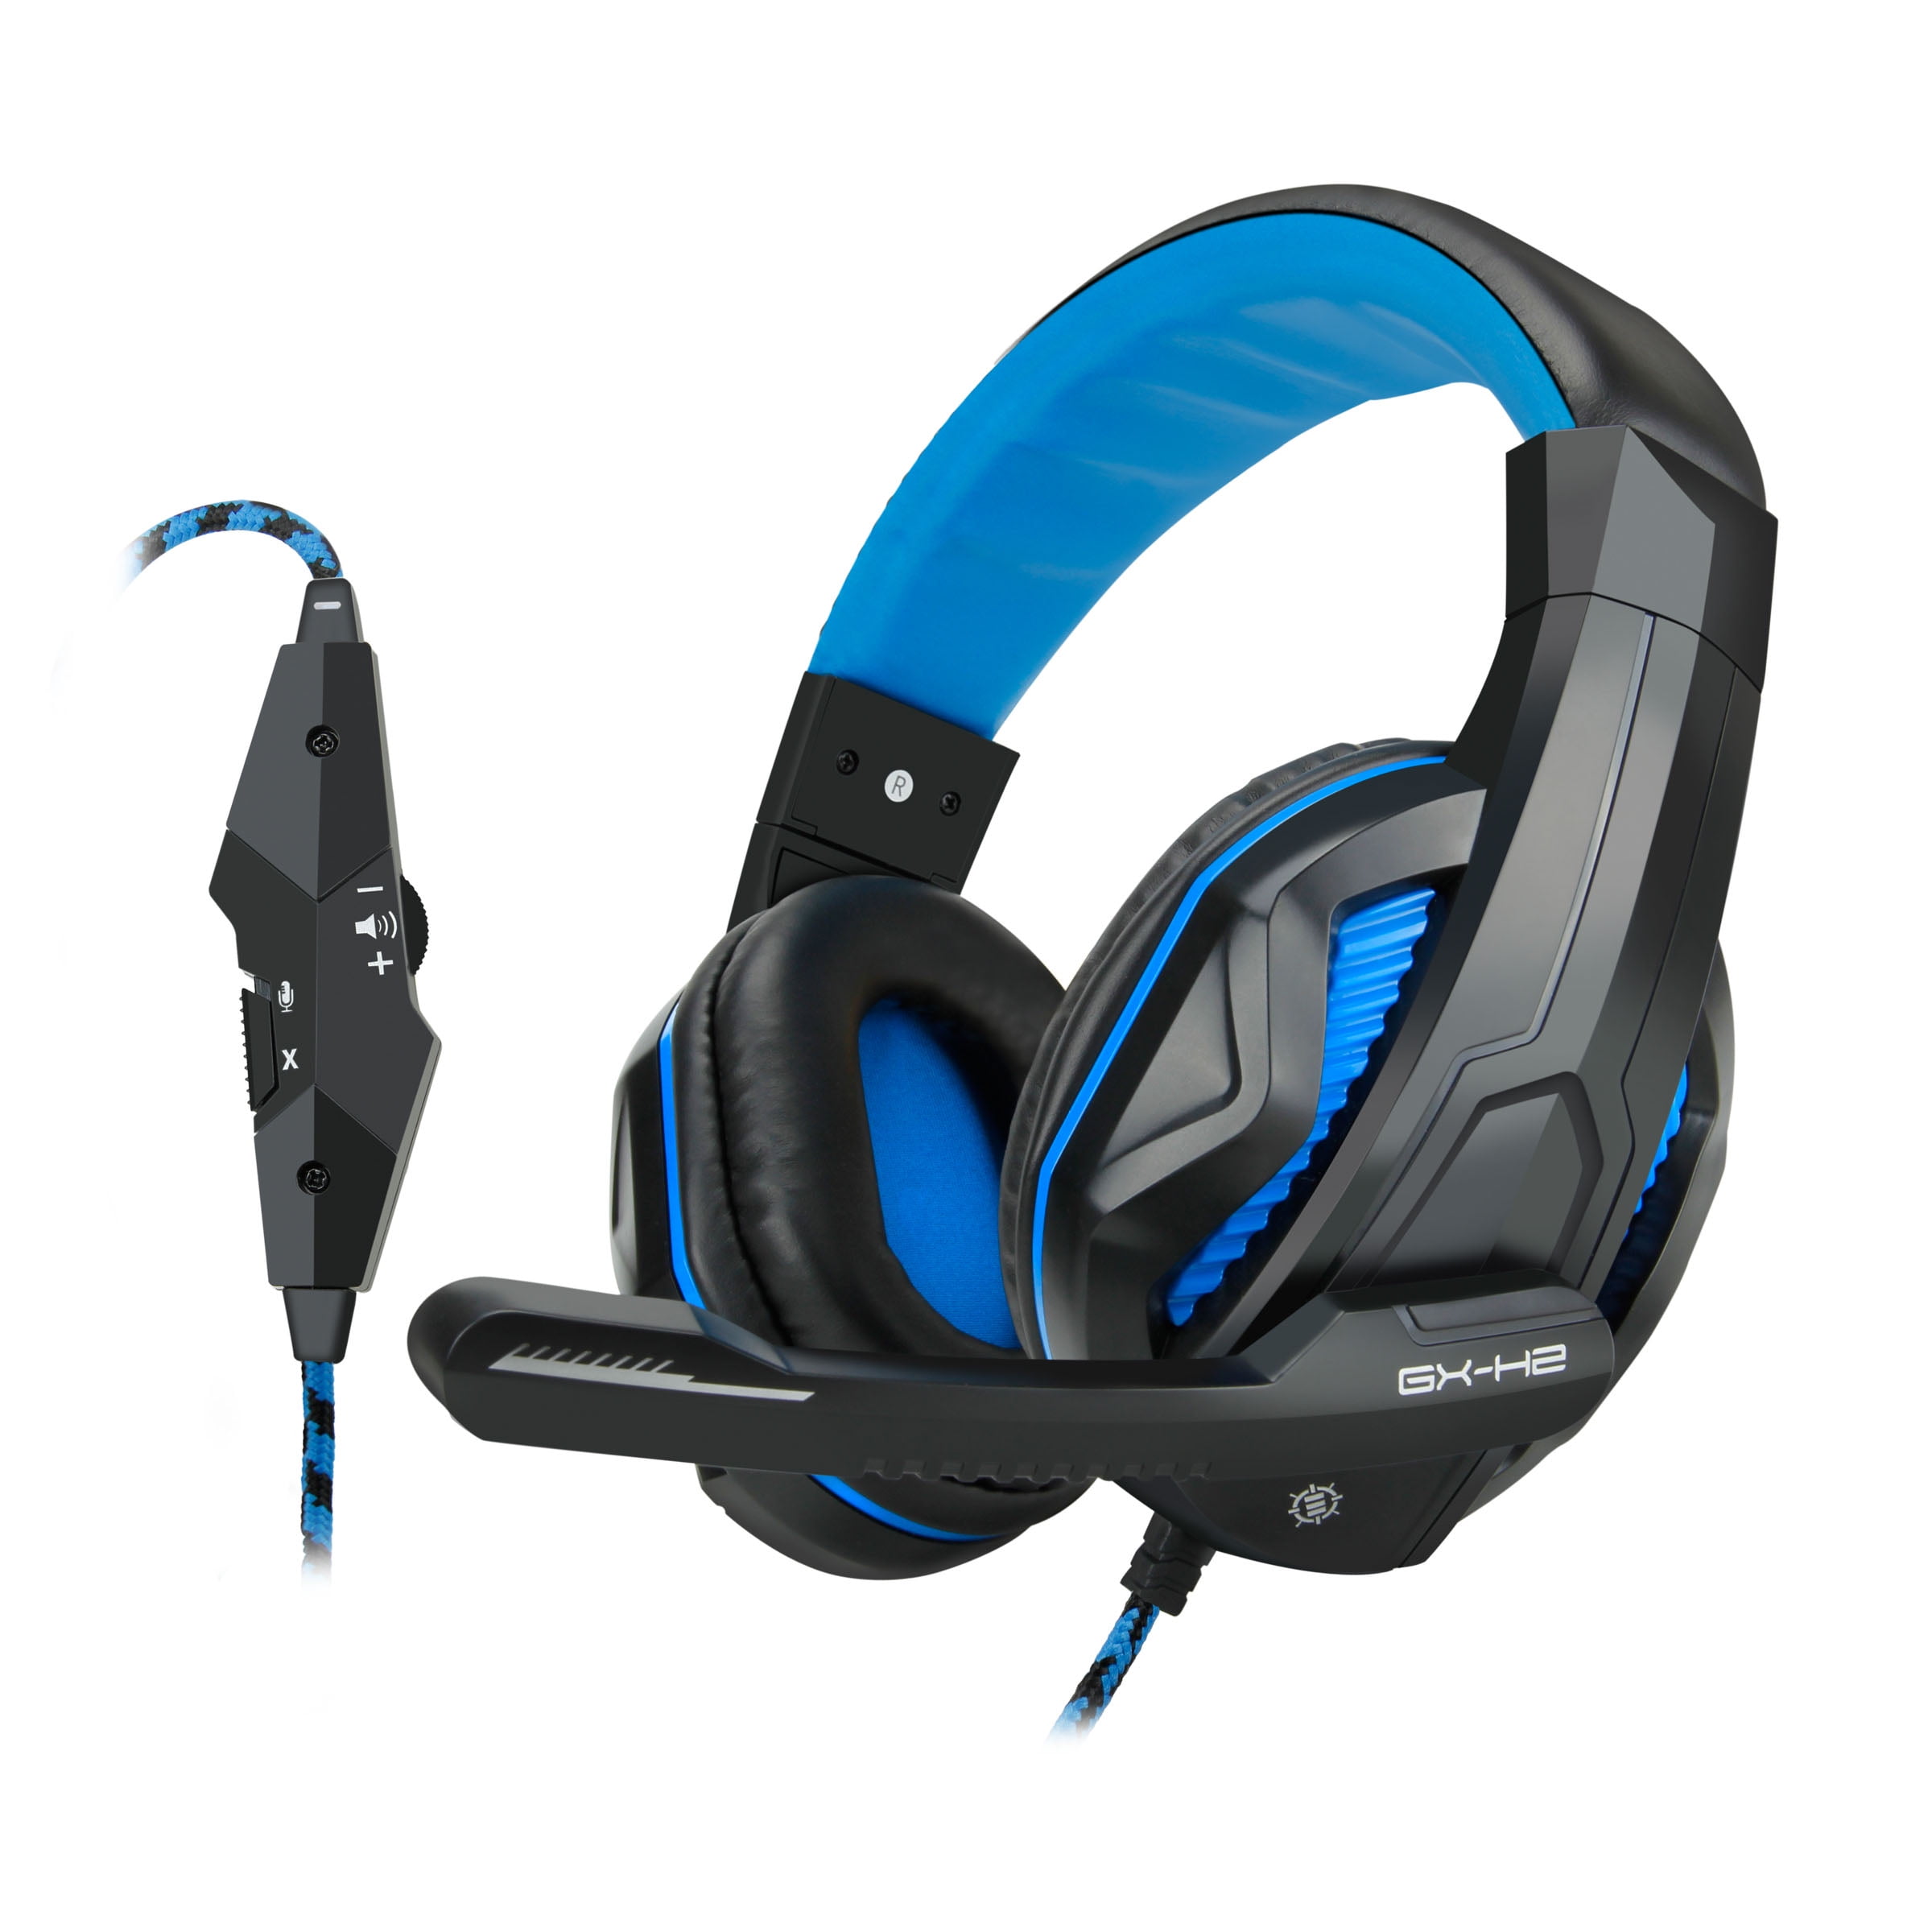 ENHANCE GX-H2 Computer Gaming Headset - Stereo PC Gaming Headset with Plush Ear Padding, Adjustable Headband and Microphone - Works with Computers, Compatible with Skype, Discord, and Curse